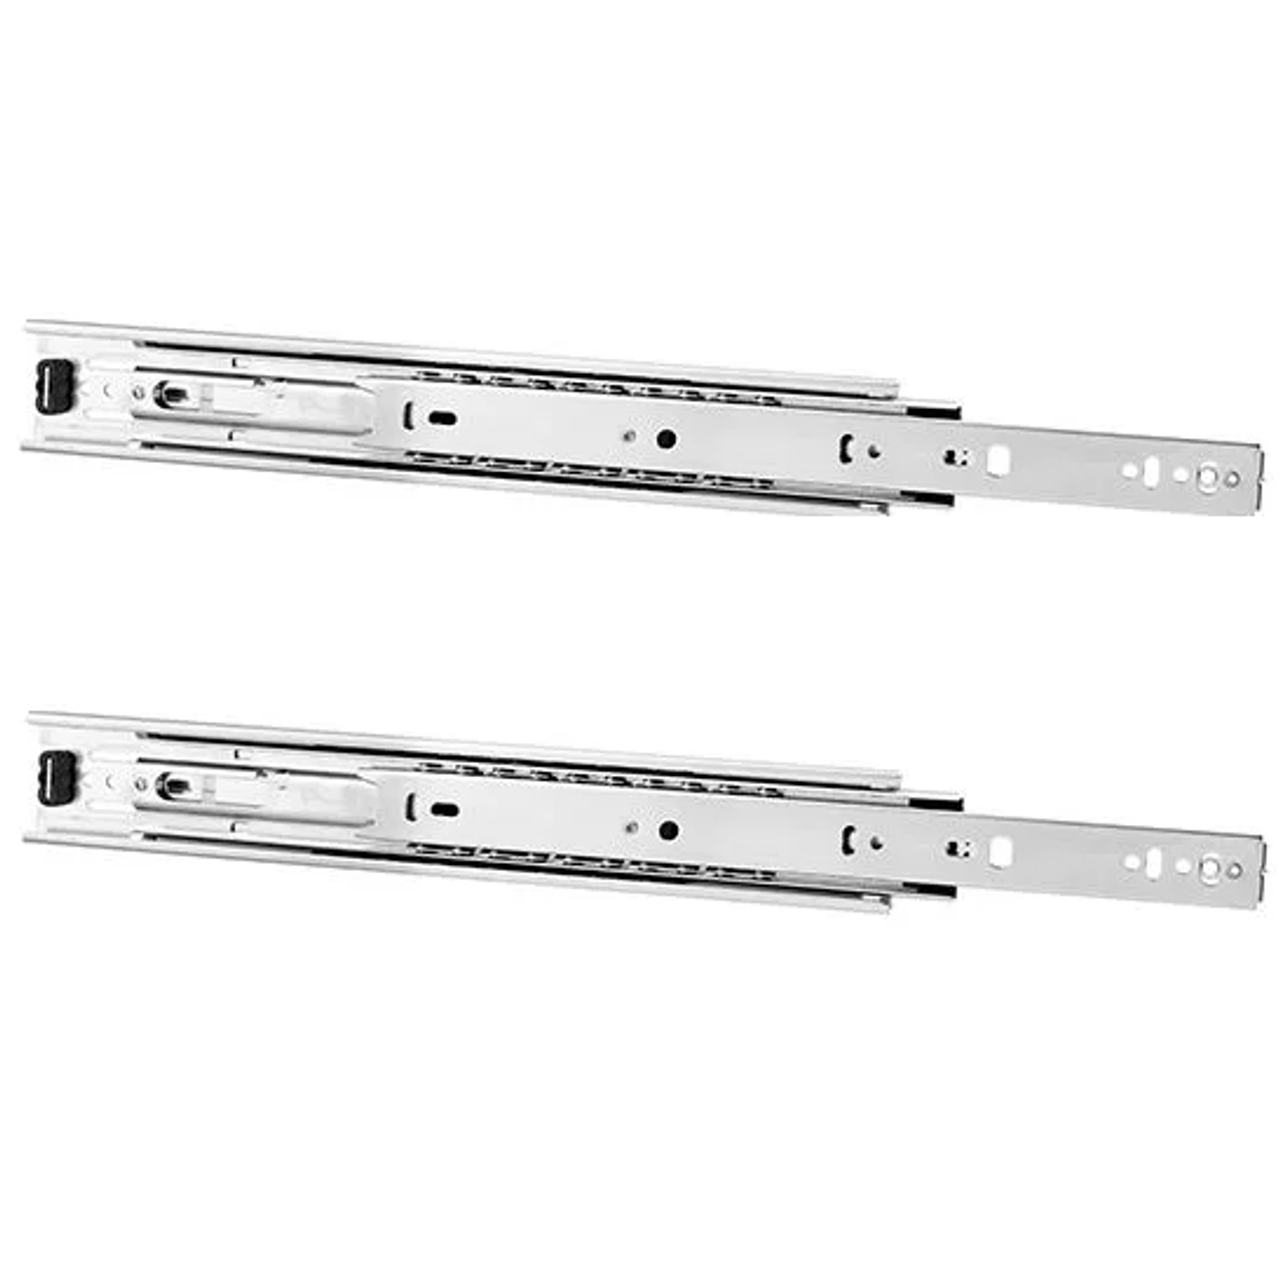 Accuride 3832E Standard Series Full Extension Drawer Slide